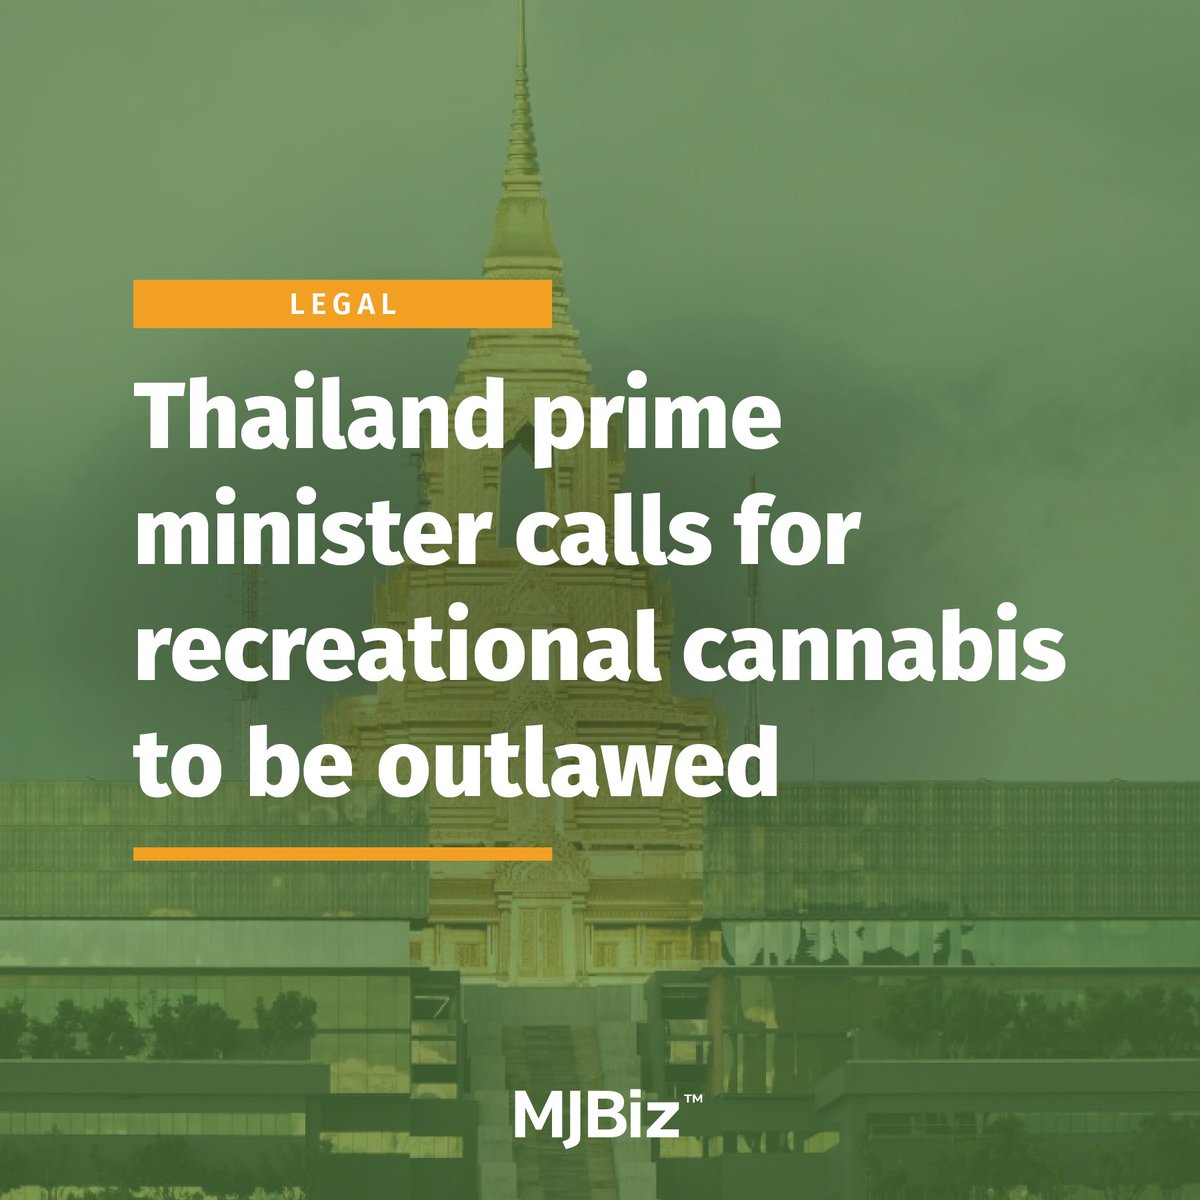 #Thailand Prime Minister Srettha Thavisin is calling on the nation’s health ministry to reclassify recreational #cannabis as an illegal substance. Read the story here: bit.ly/3yfse3O (Photo by Apicha/stock.adobe.com)